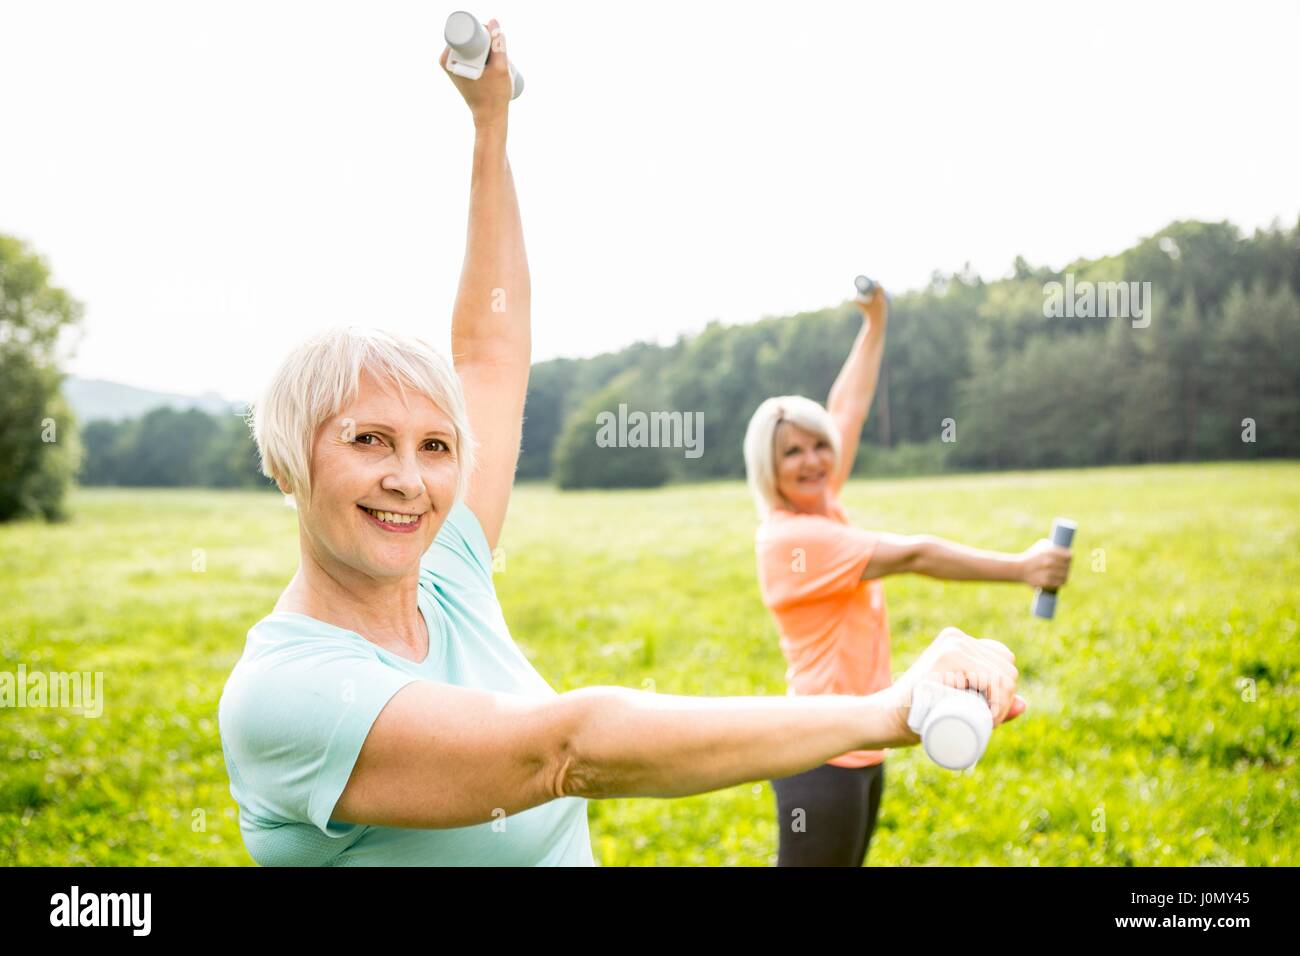 Two women exercising with hand weights. Stock Photo